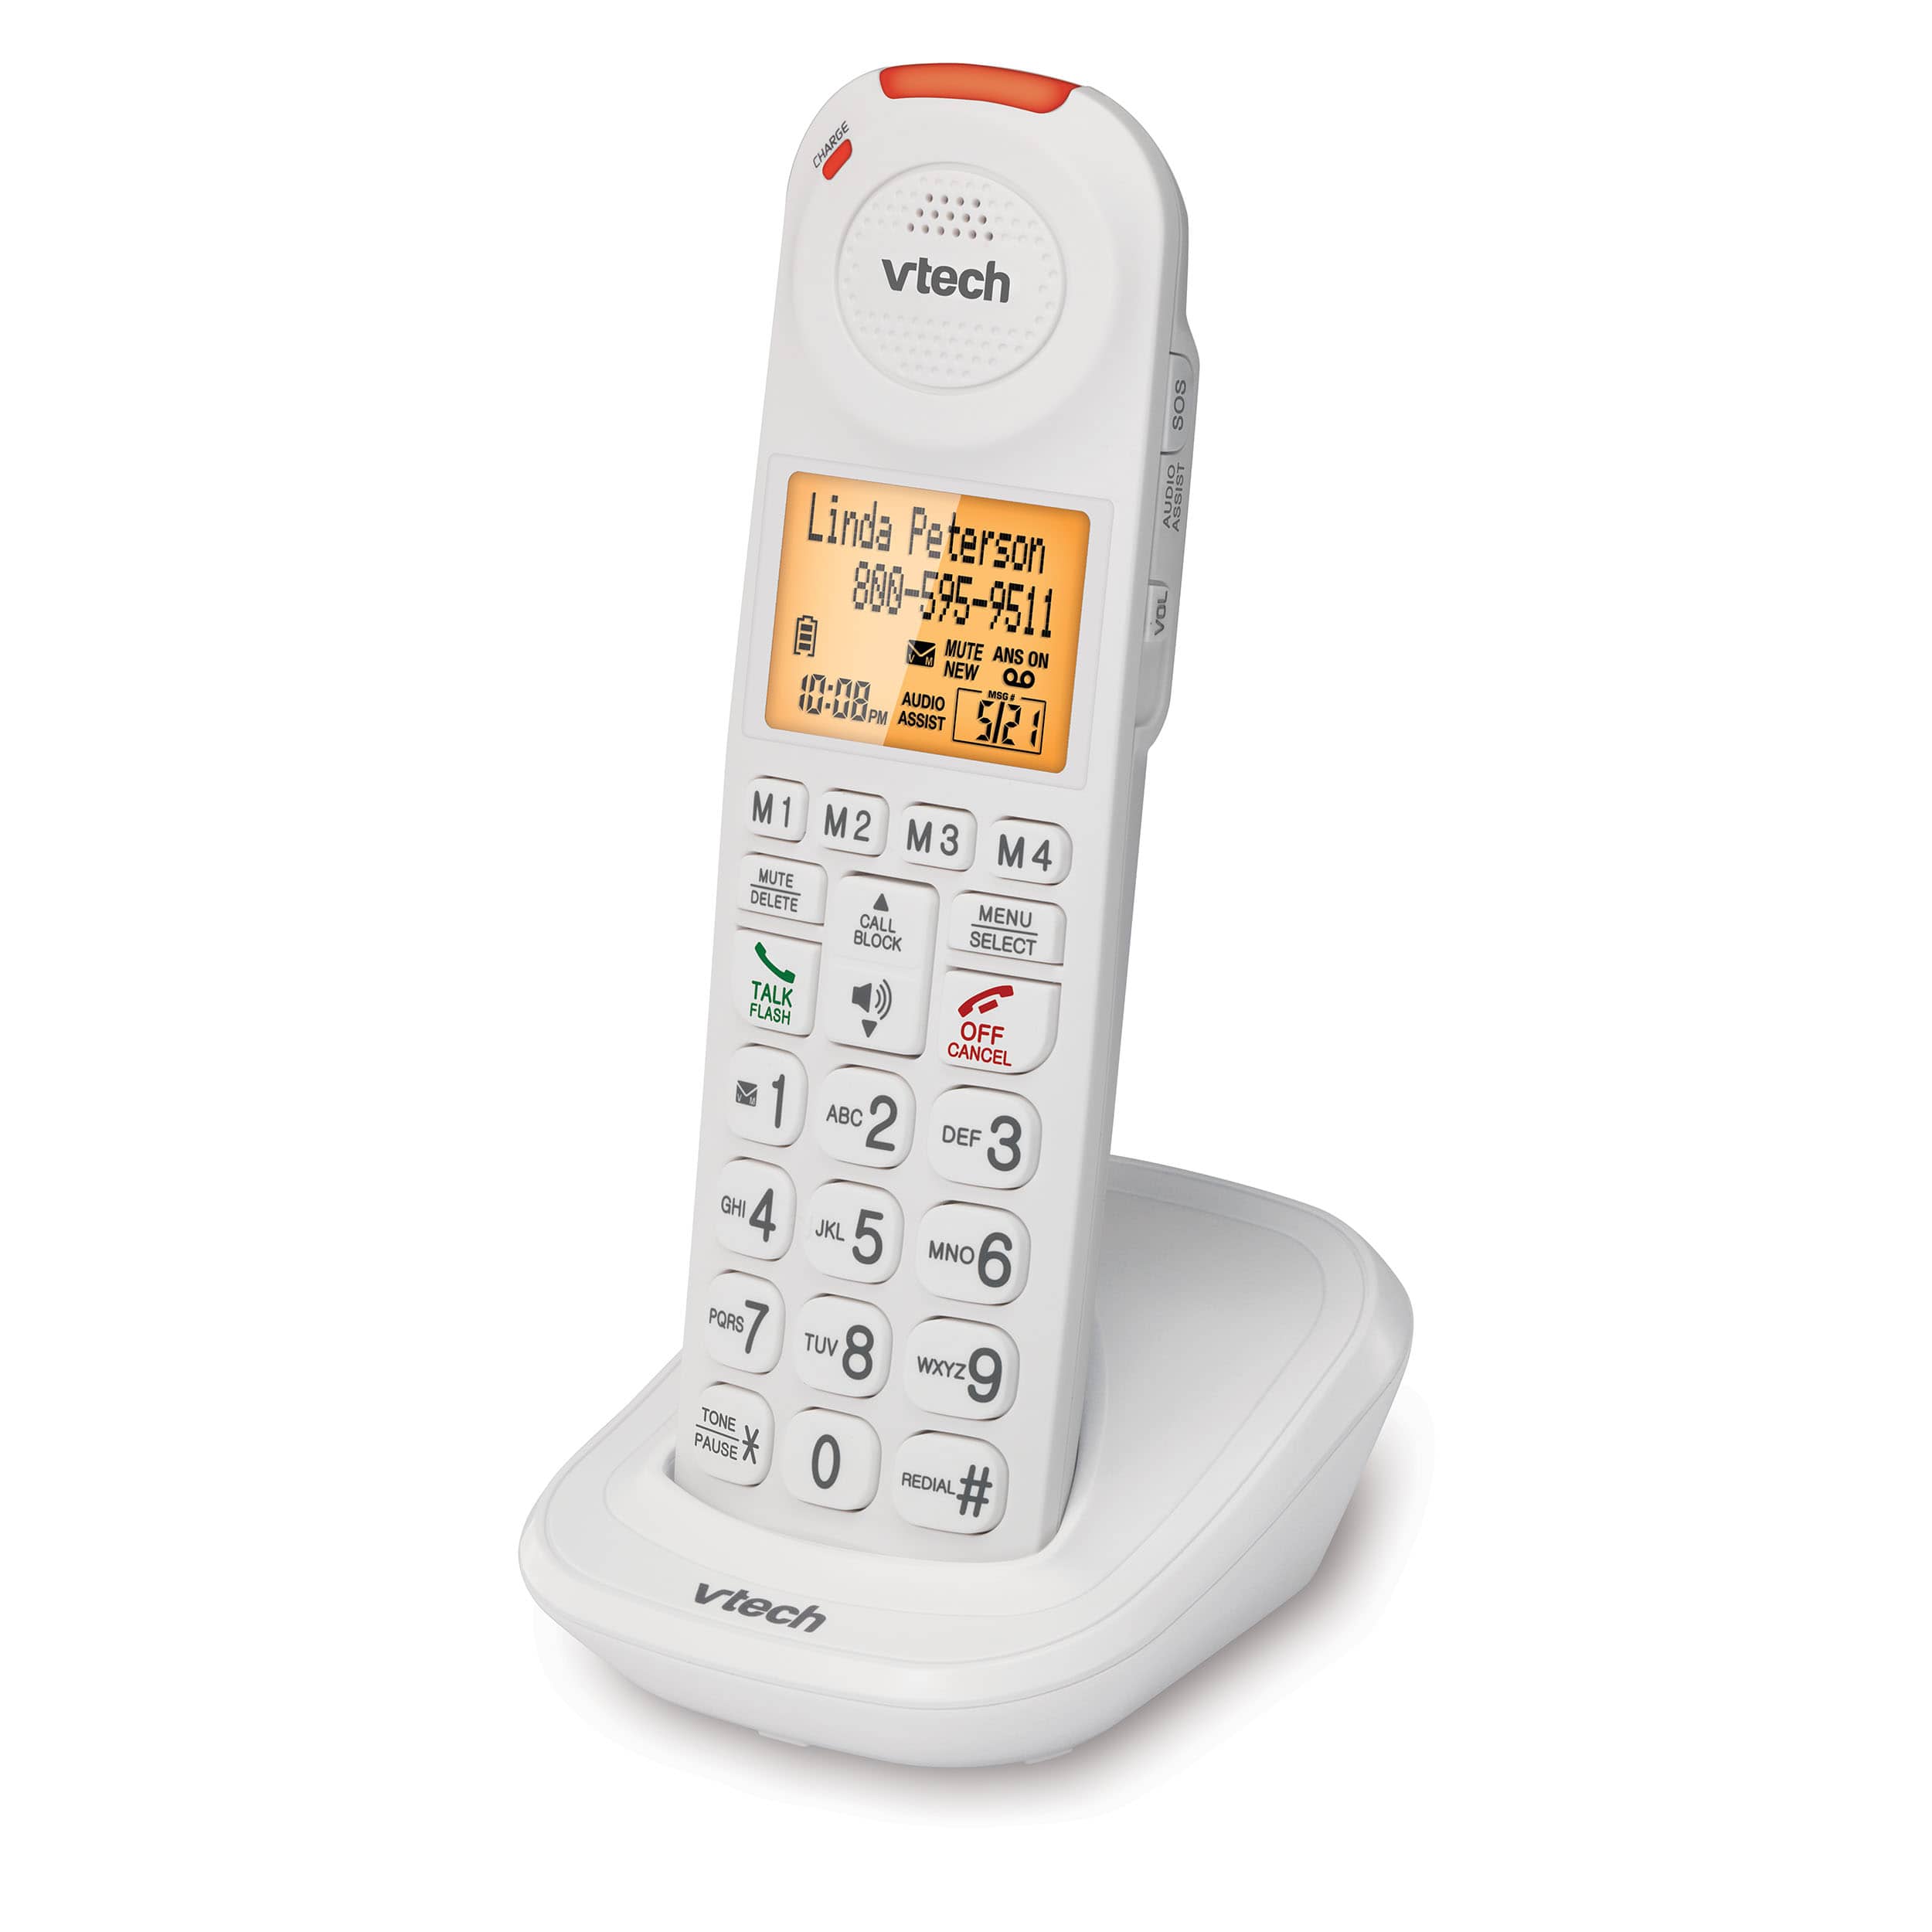 4 Handset Amplified Cordless Answering System with Big Buttons and Display